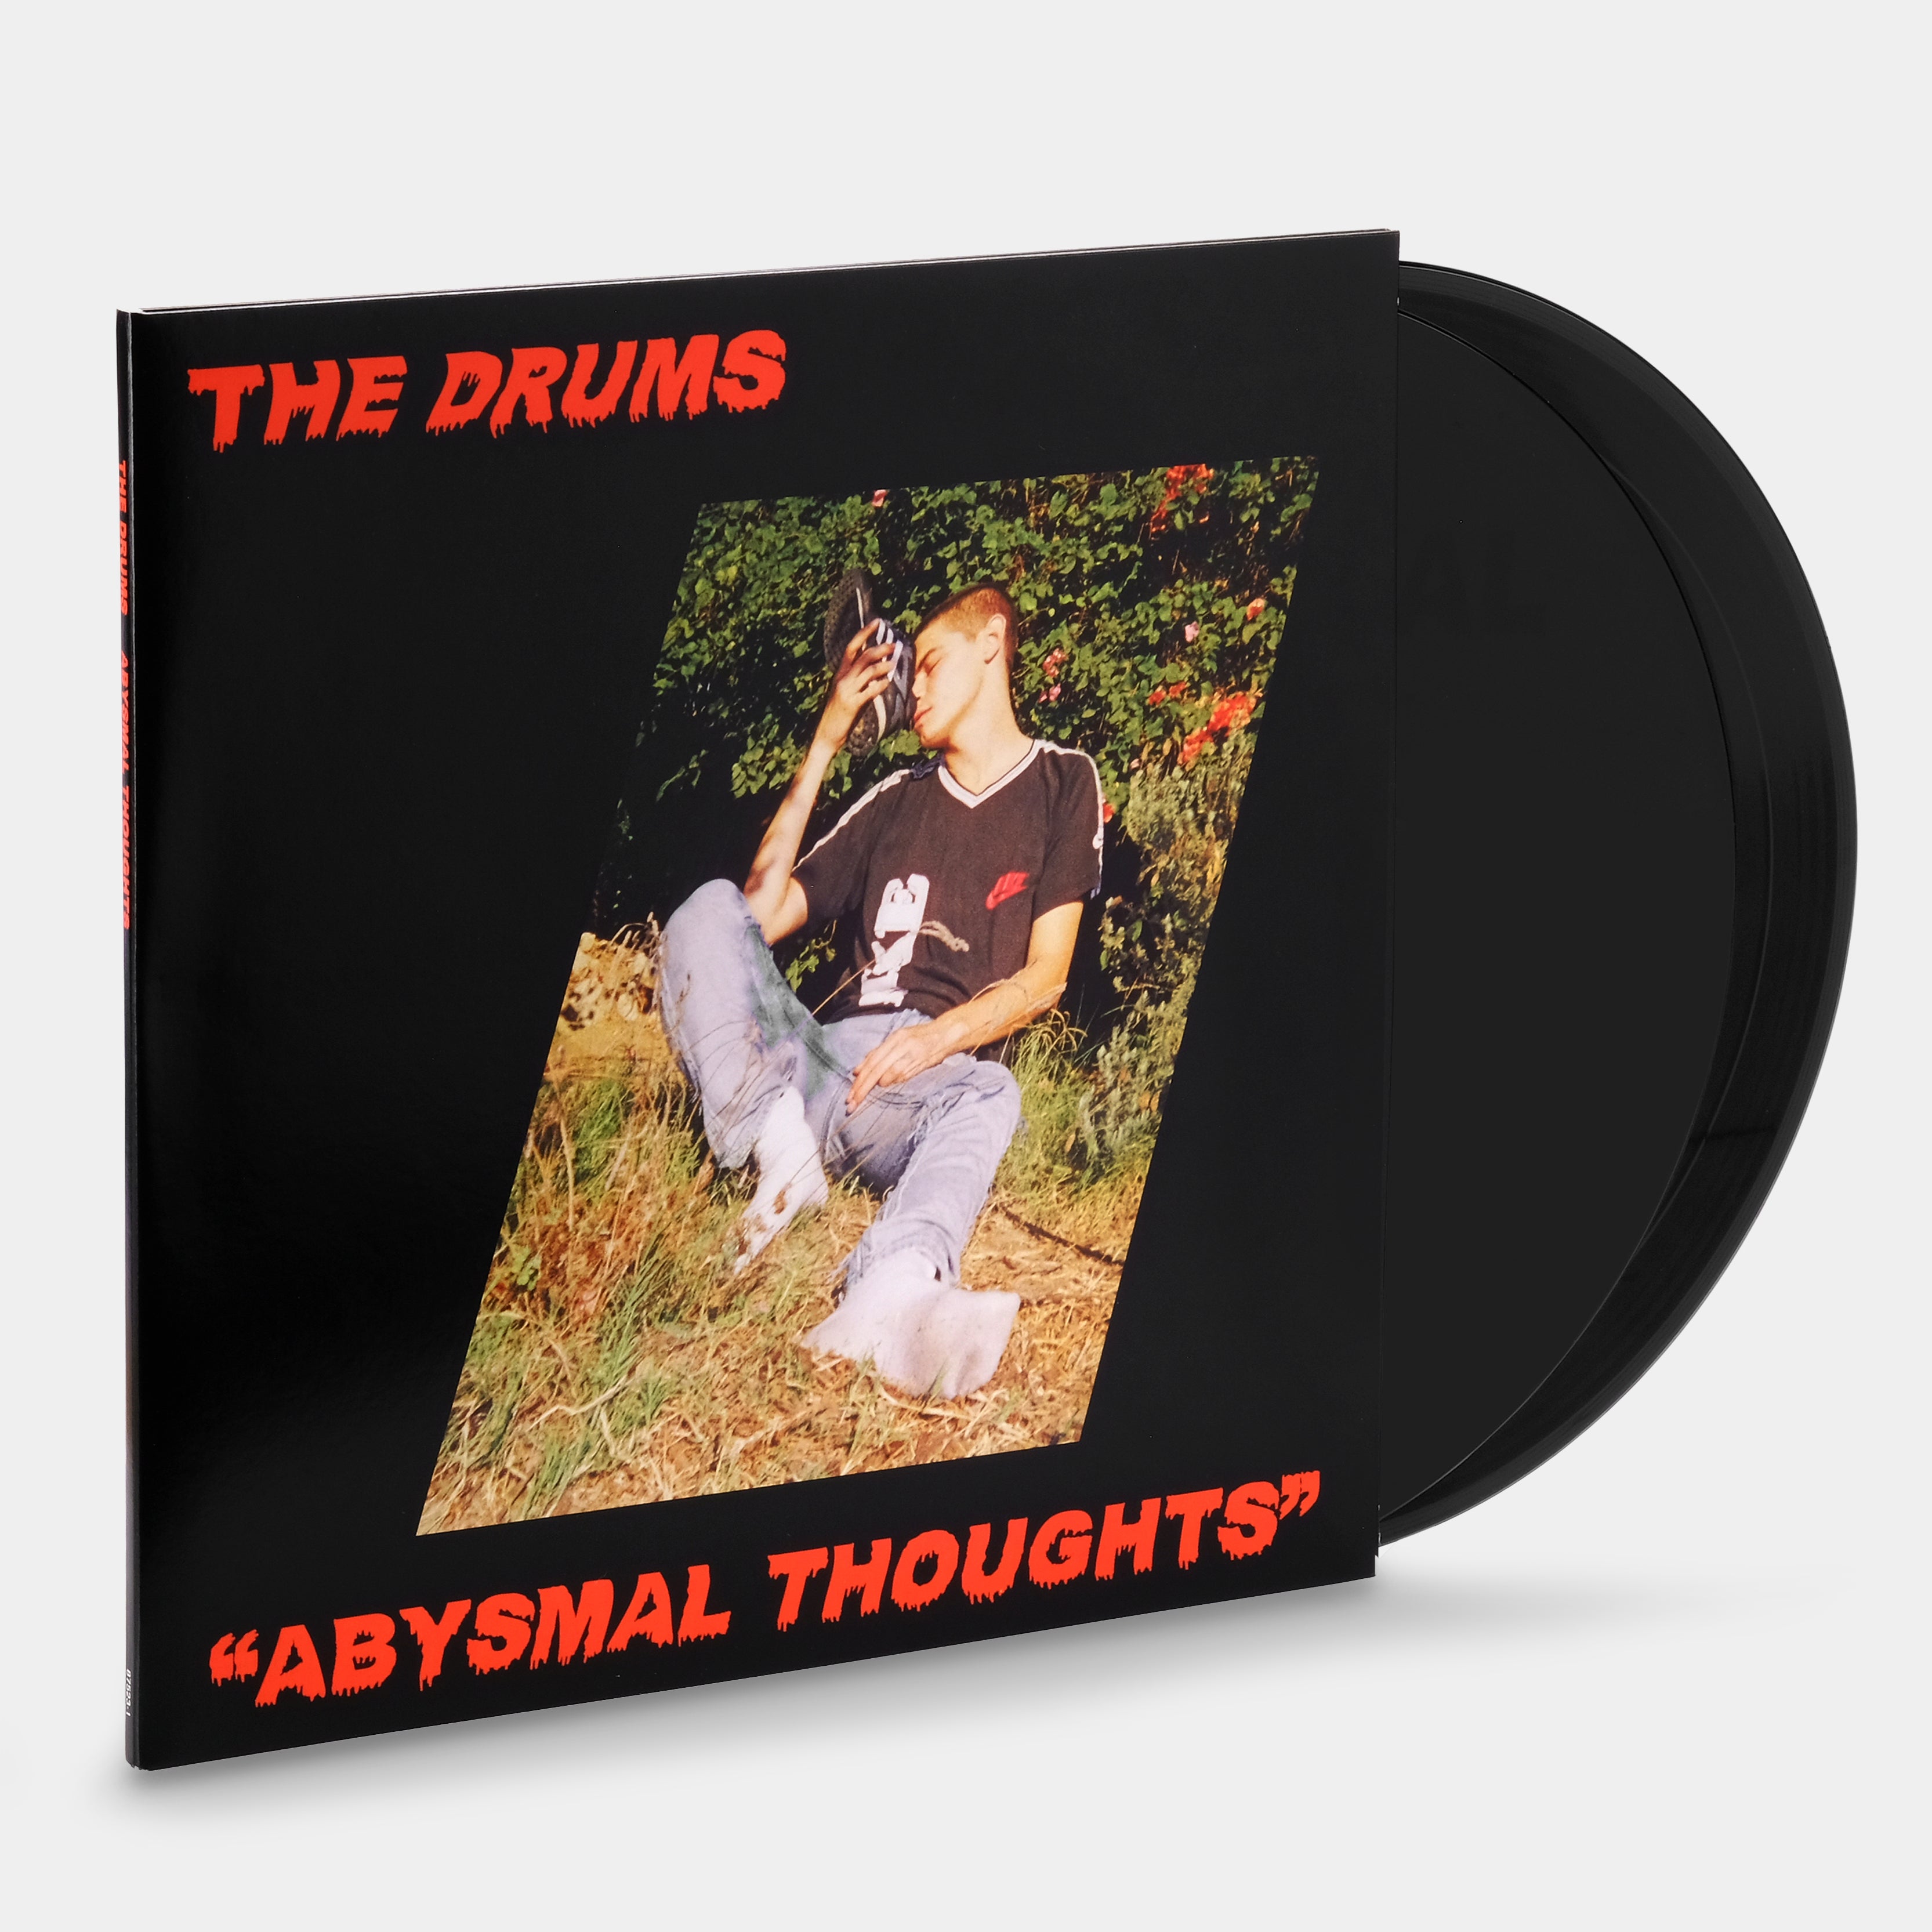 The Drums - Abysmal Thoughts 2xLP Vinyl Record